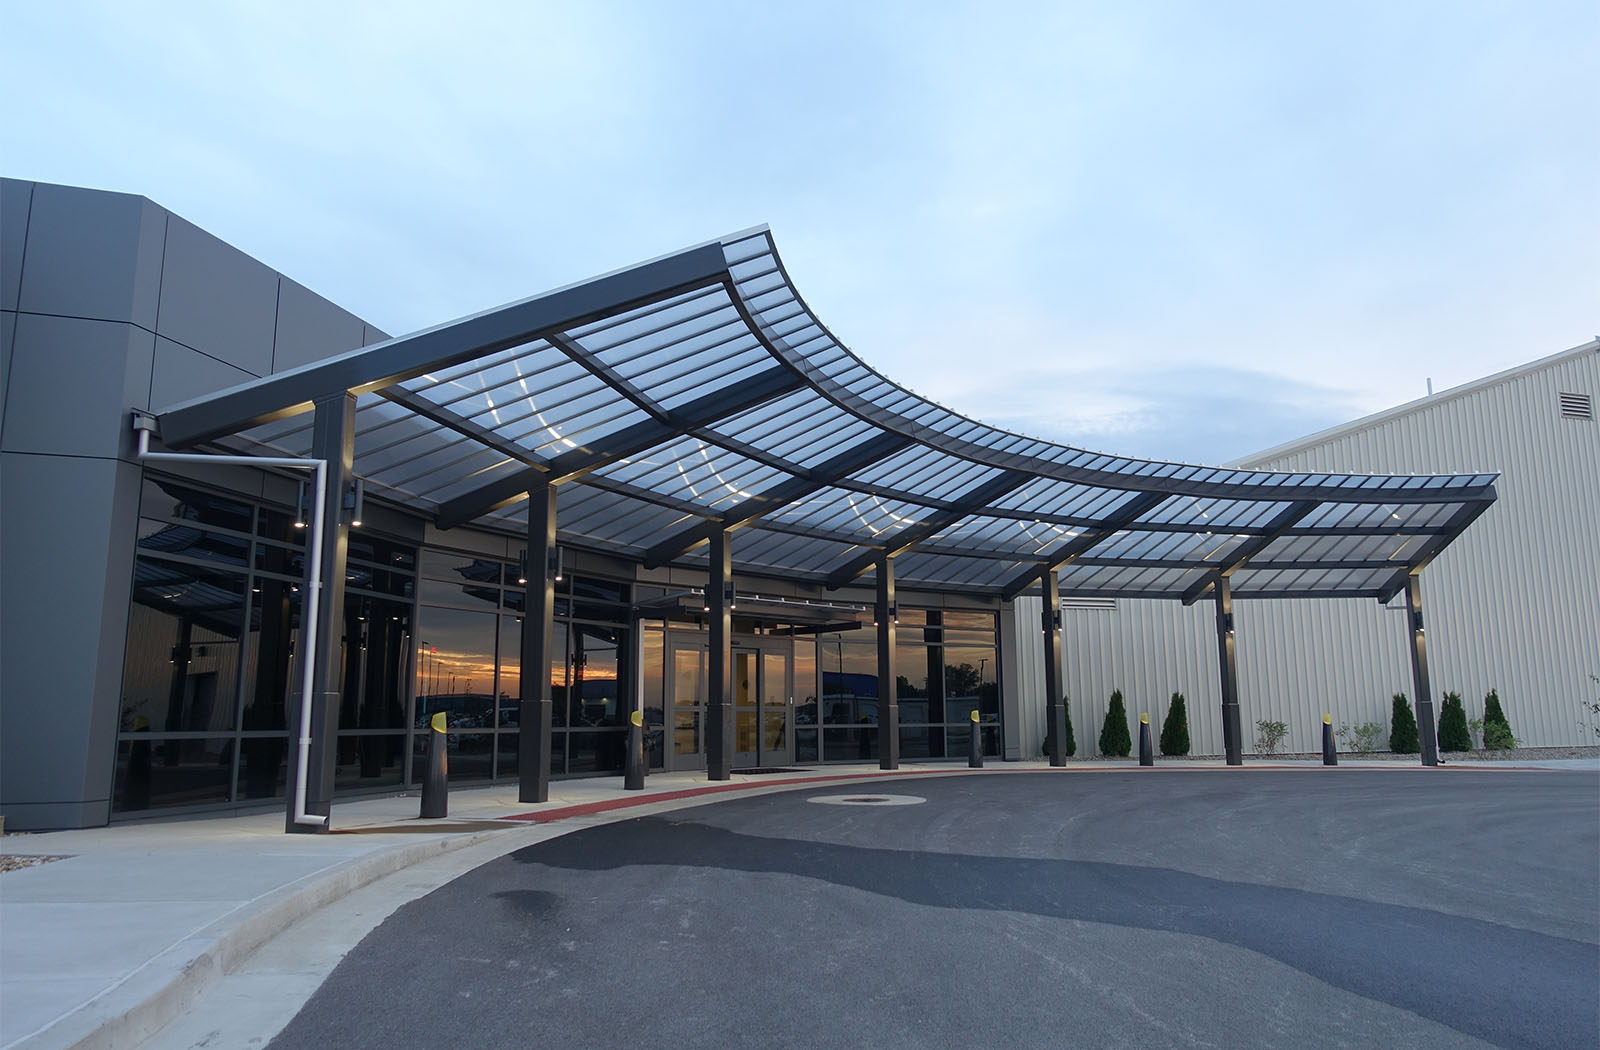 Steller Aviation-60168b-22x85-Entrance Canopy-Corporate Campus